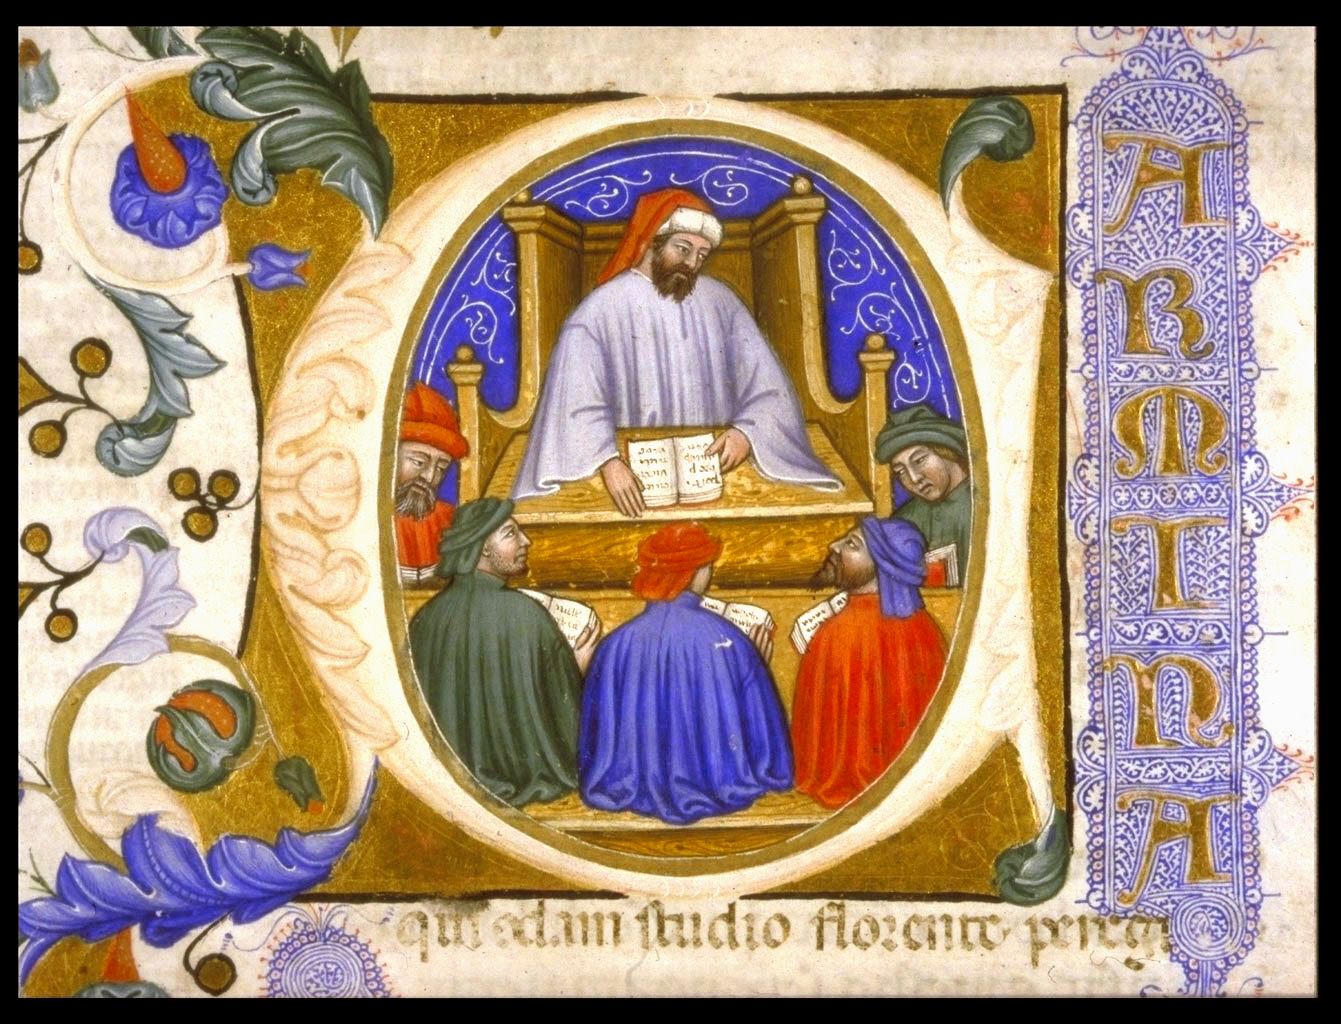 Initial depicting Boethius teaching his students from folio 4r of a manuscript of the Consolation of Philosophy (Italy?, 1385)